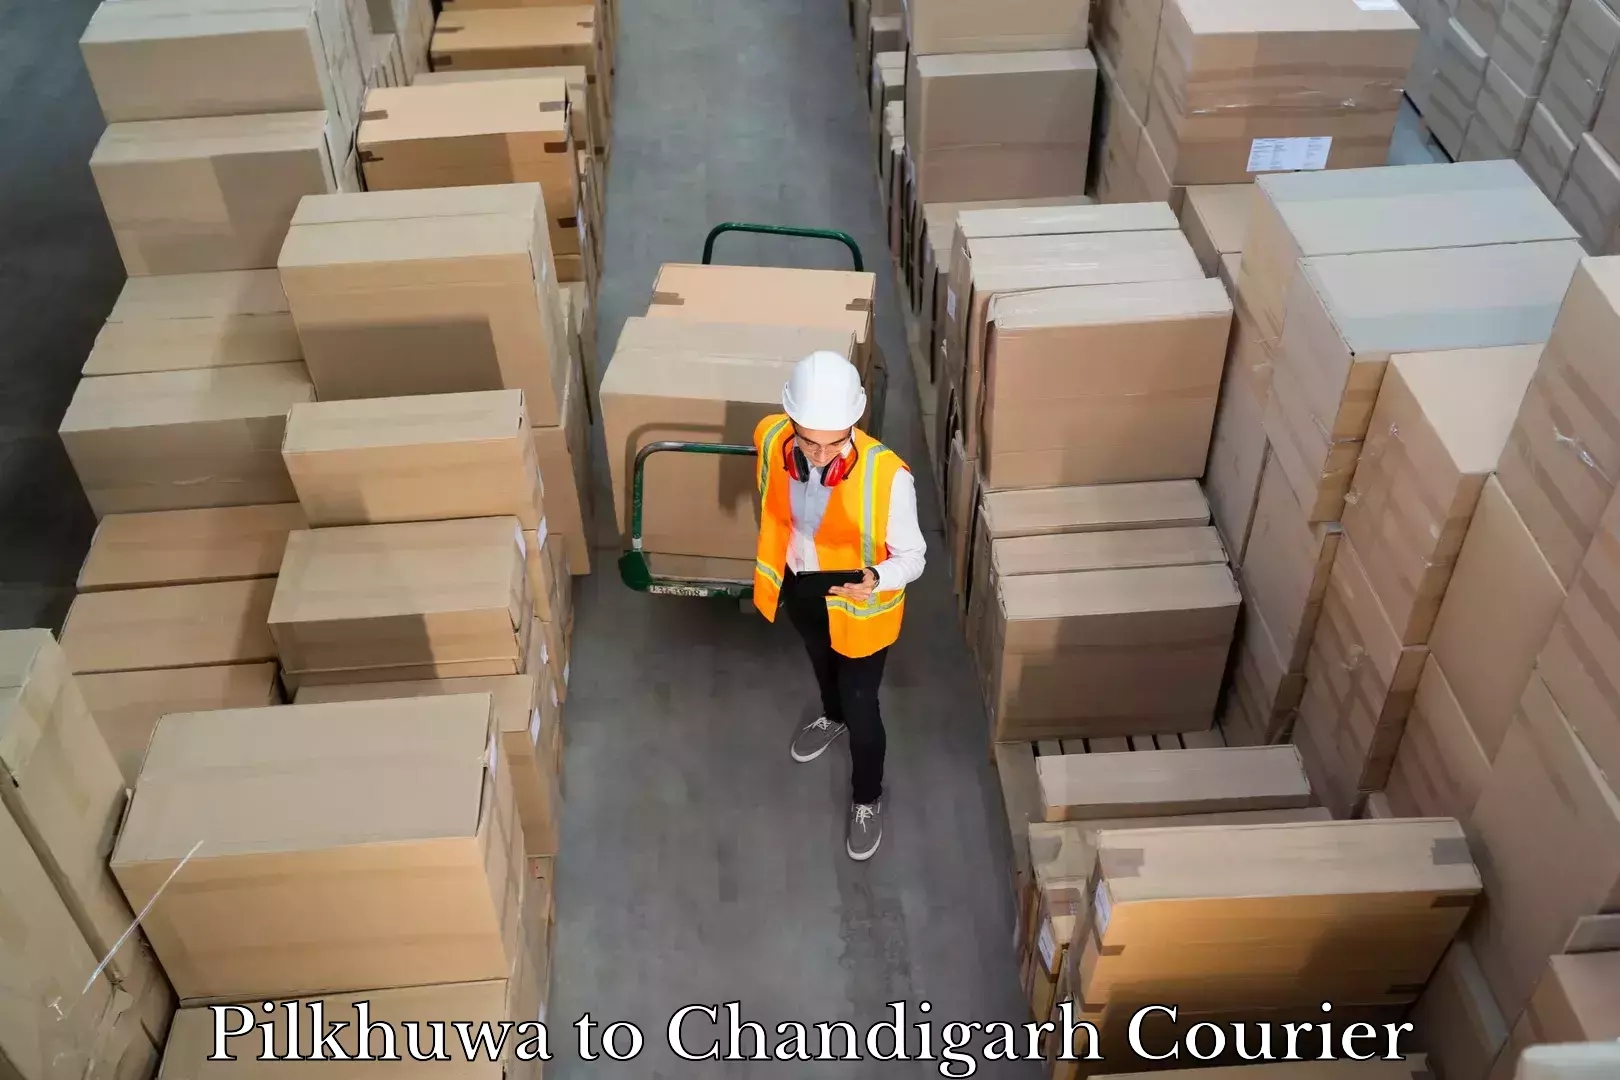 Luggage delivery system Pilkhuwa to Chandigarh